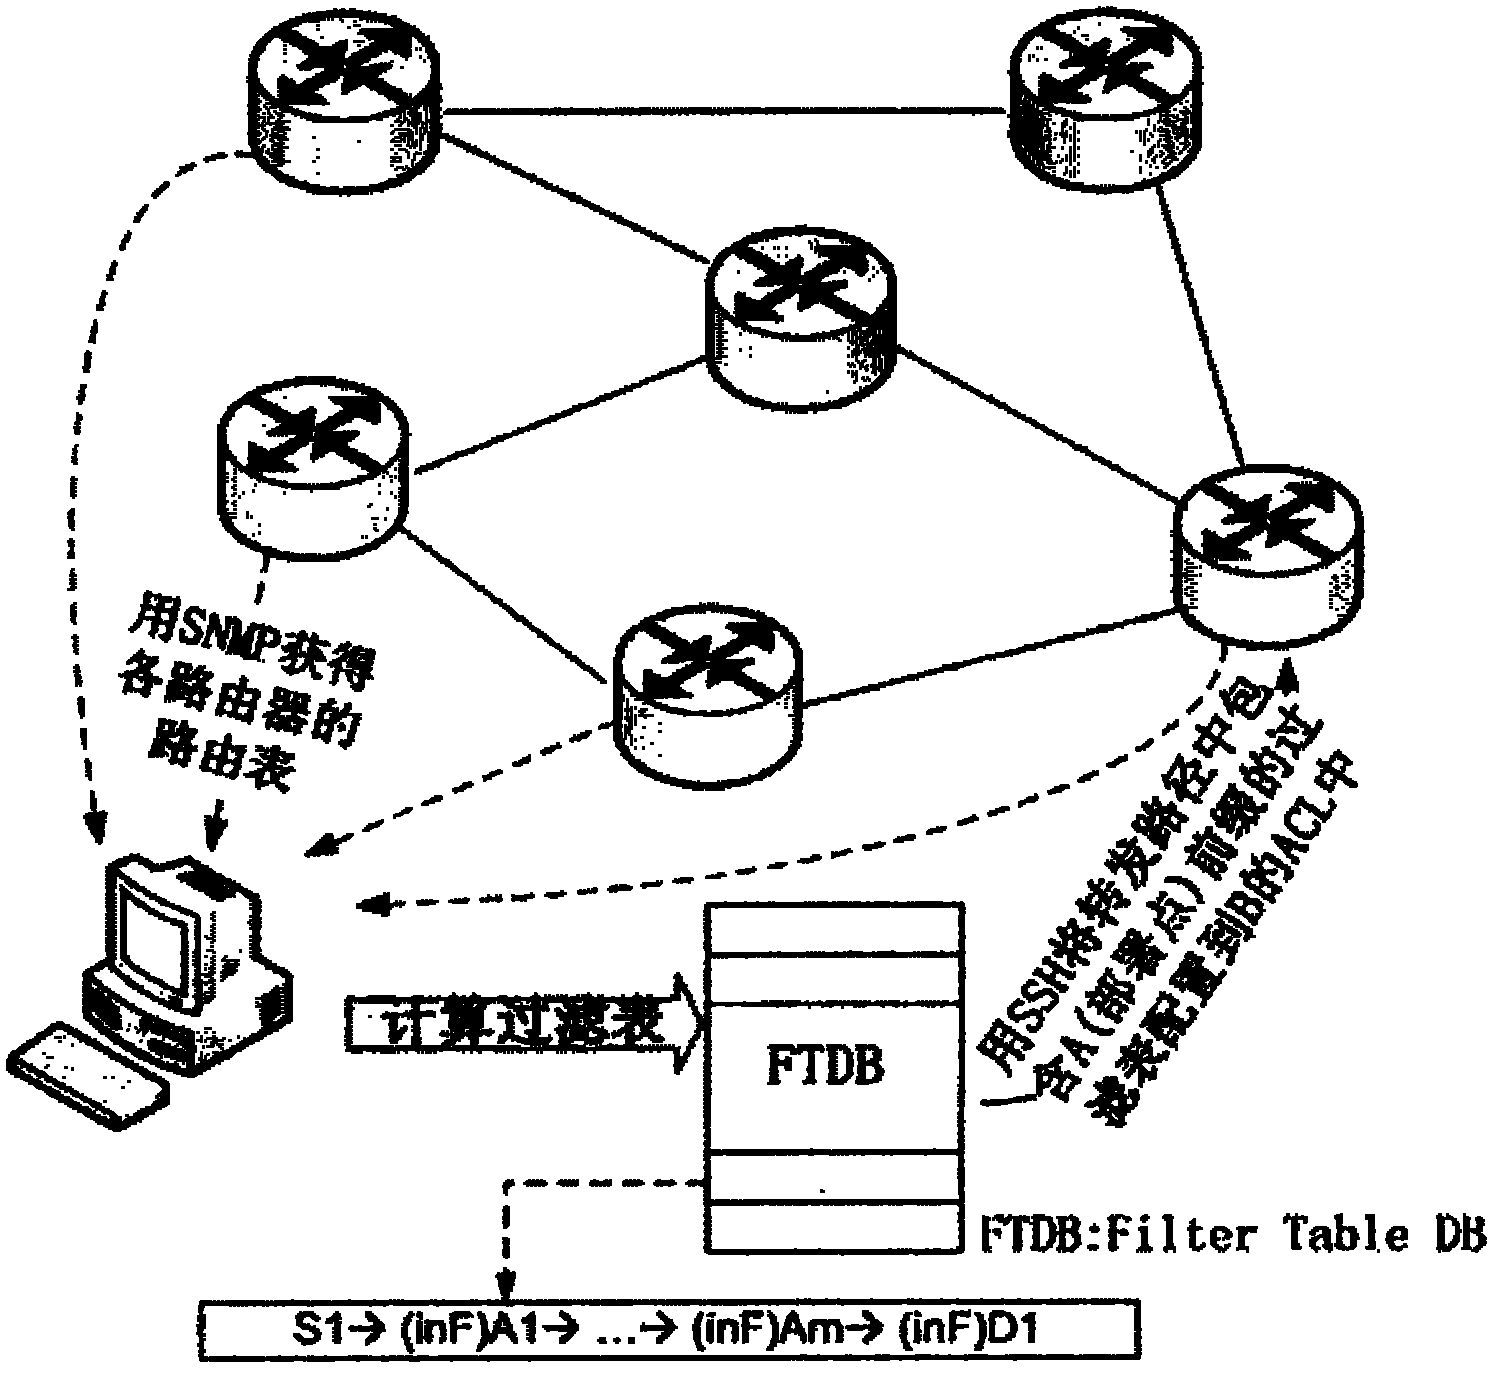 Method for verifying intra-domain Internet protocol (IP) source address